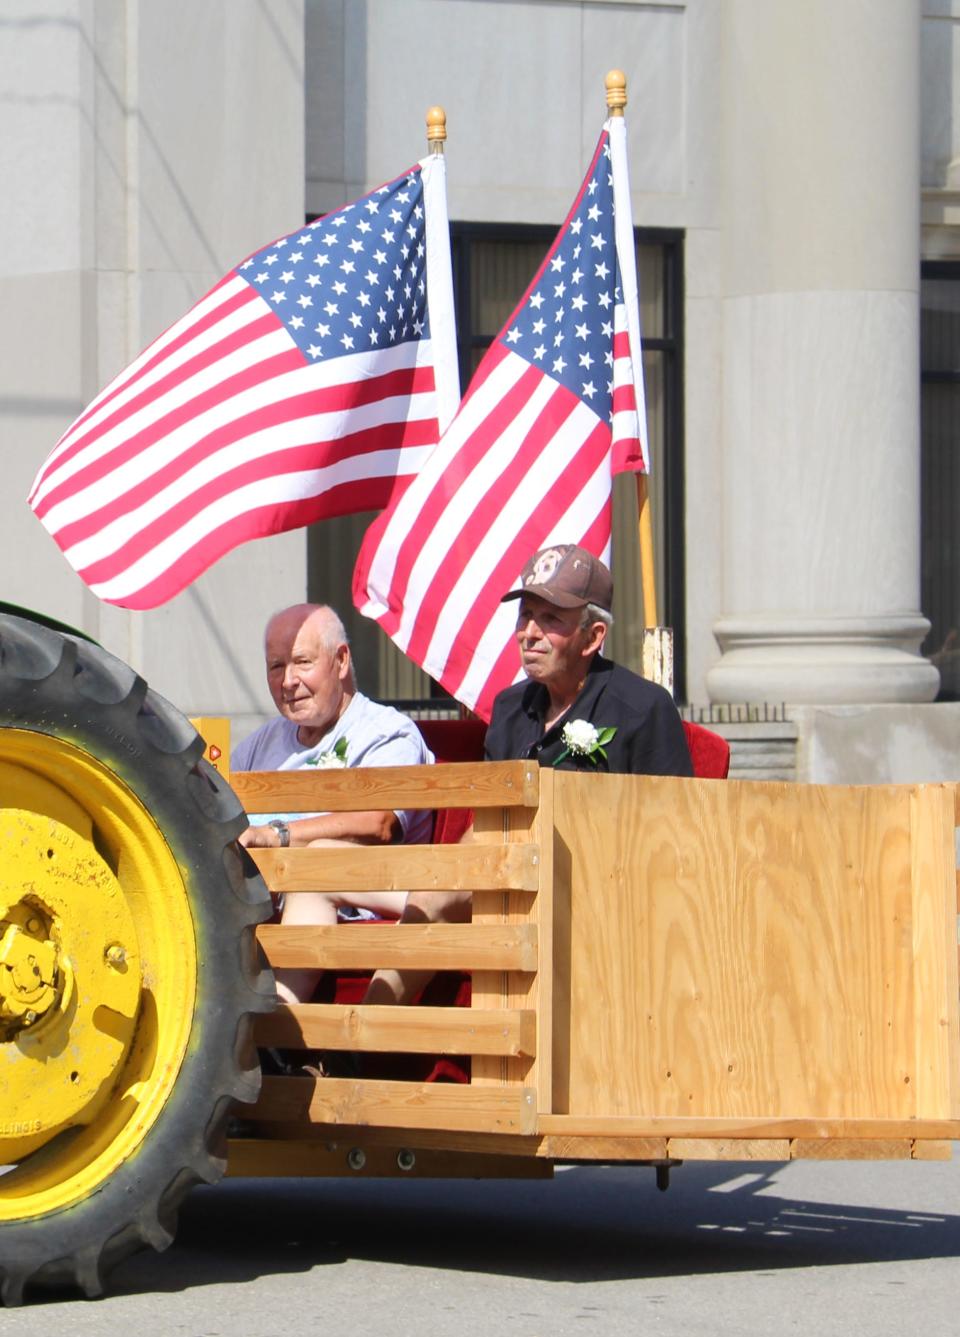 Long-time fair supporters Albert Russell and Ed Mercer were honored as grand marshals for the parade and for the week.